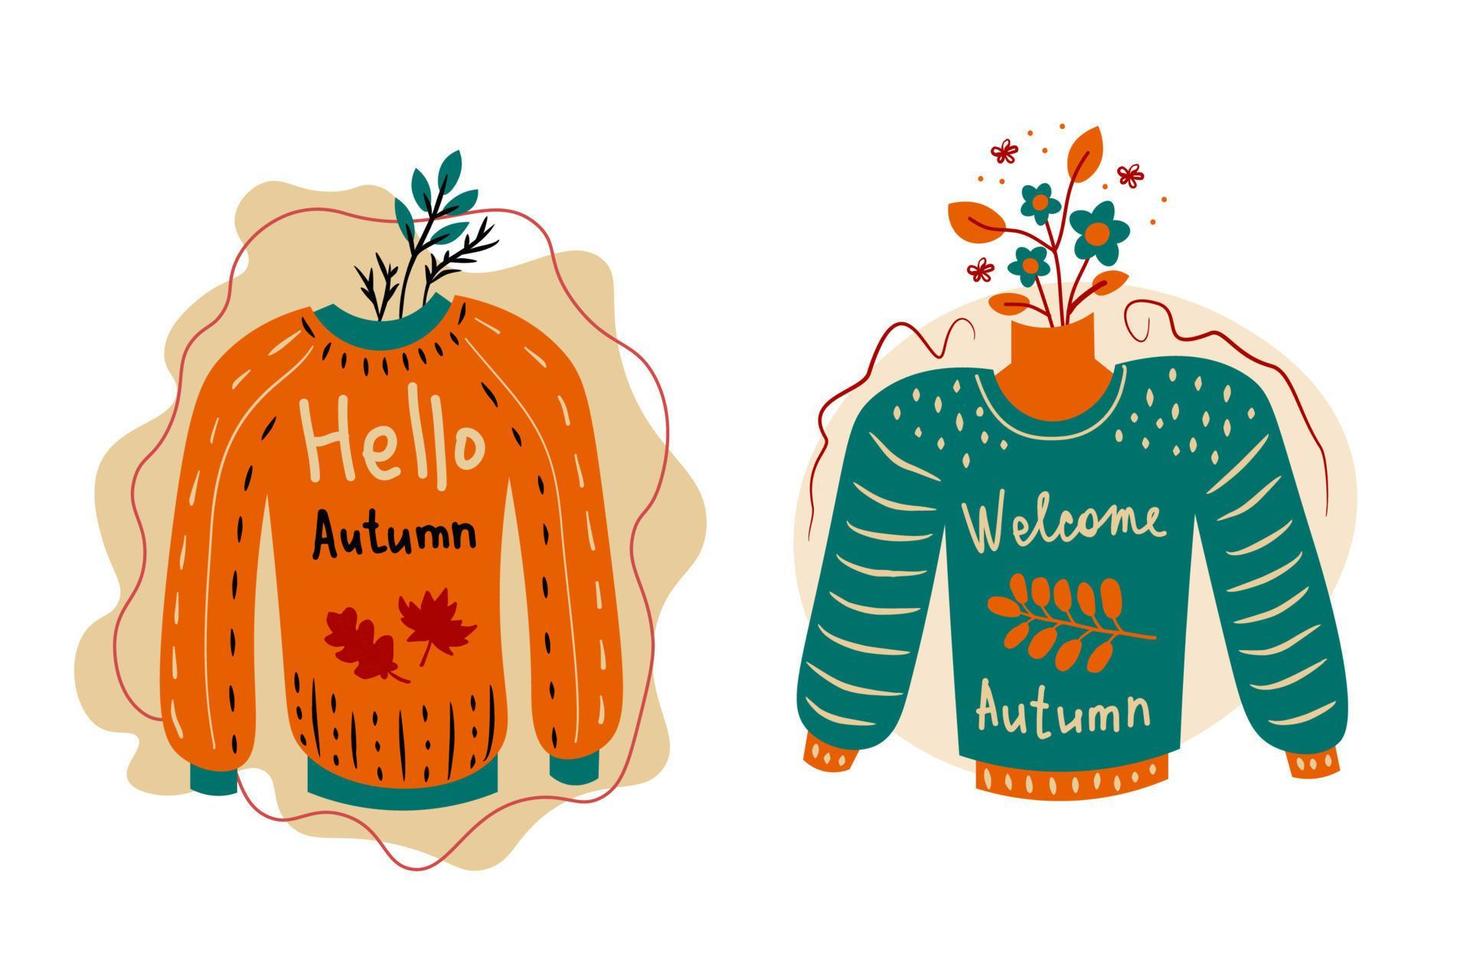 Autumn sweater set with twigs and lettering vector